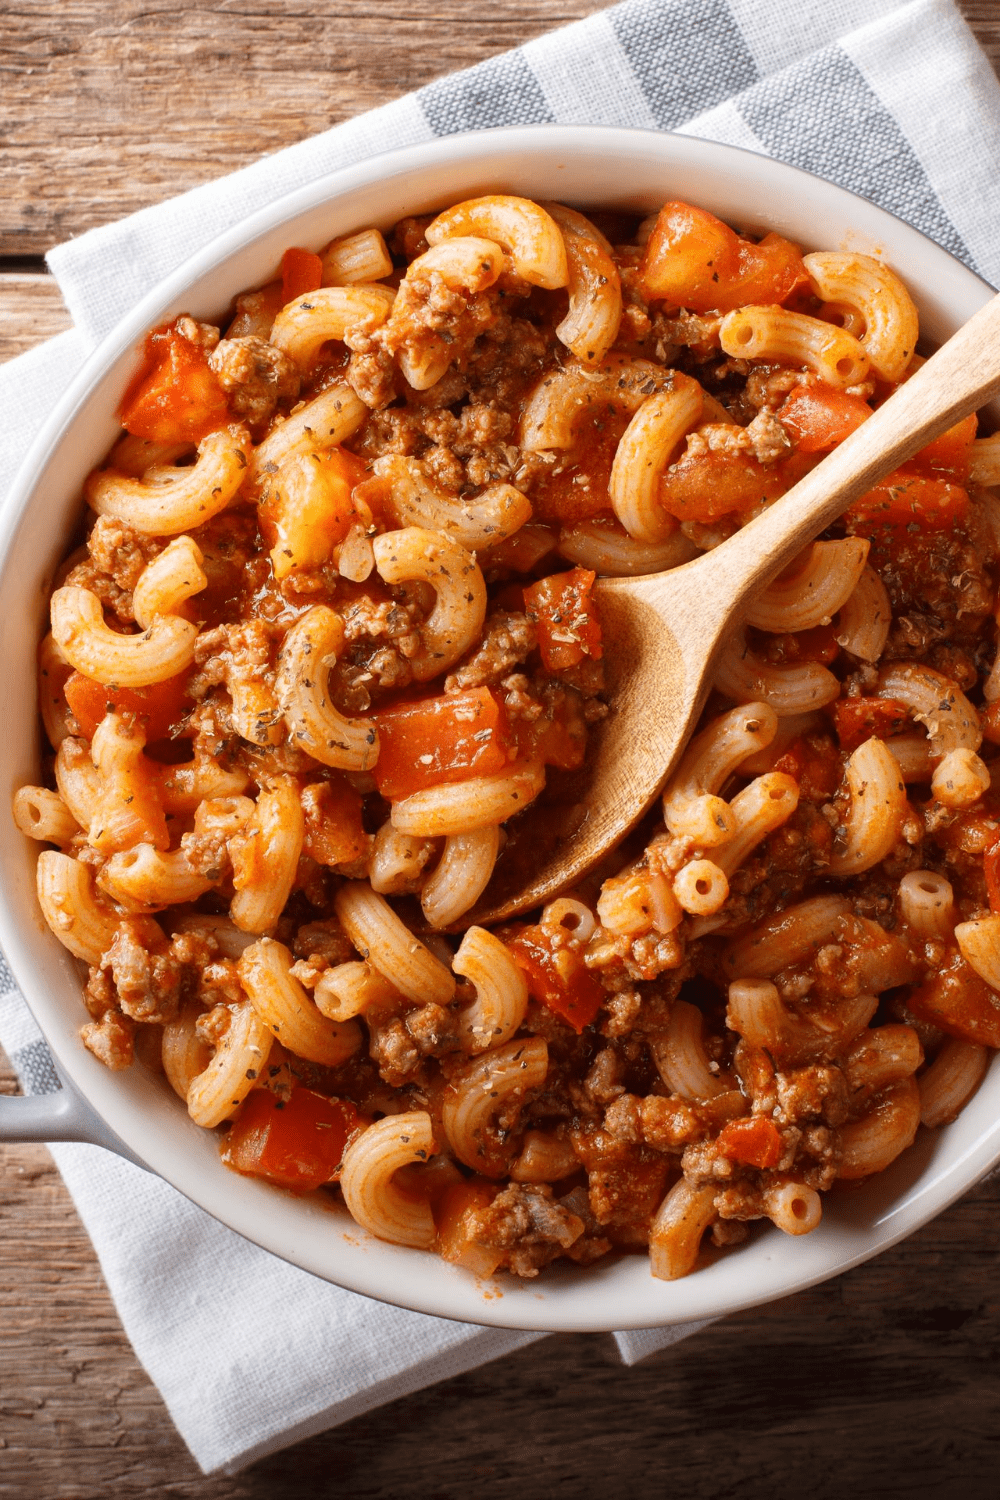 Bowl of macaroni pasta in tomato sauce and ground beef served on a bowl with wooden spoon